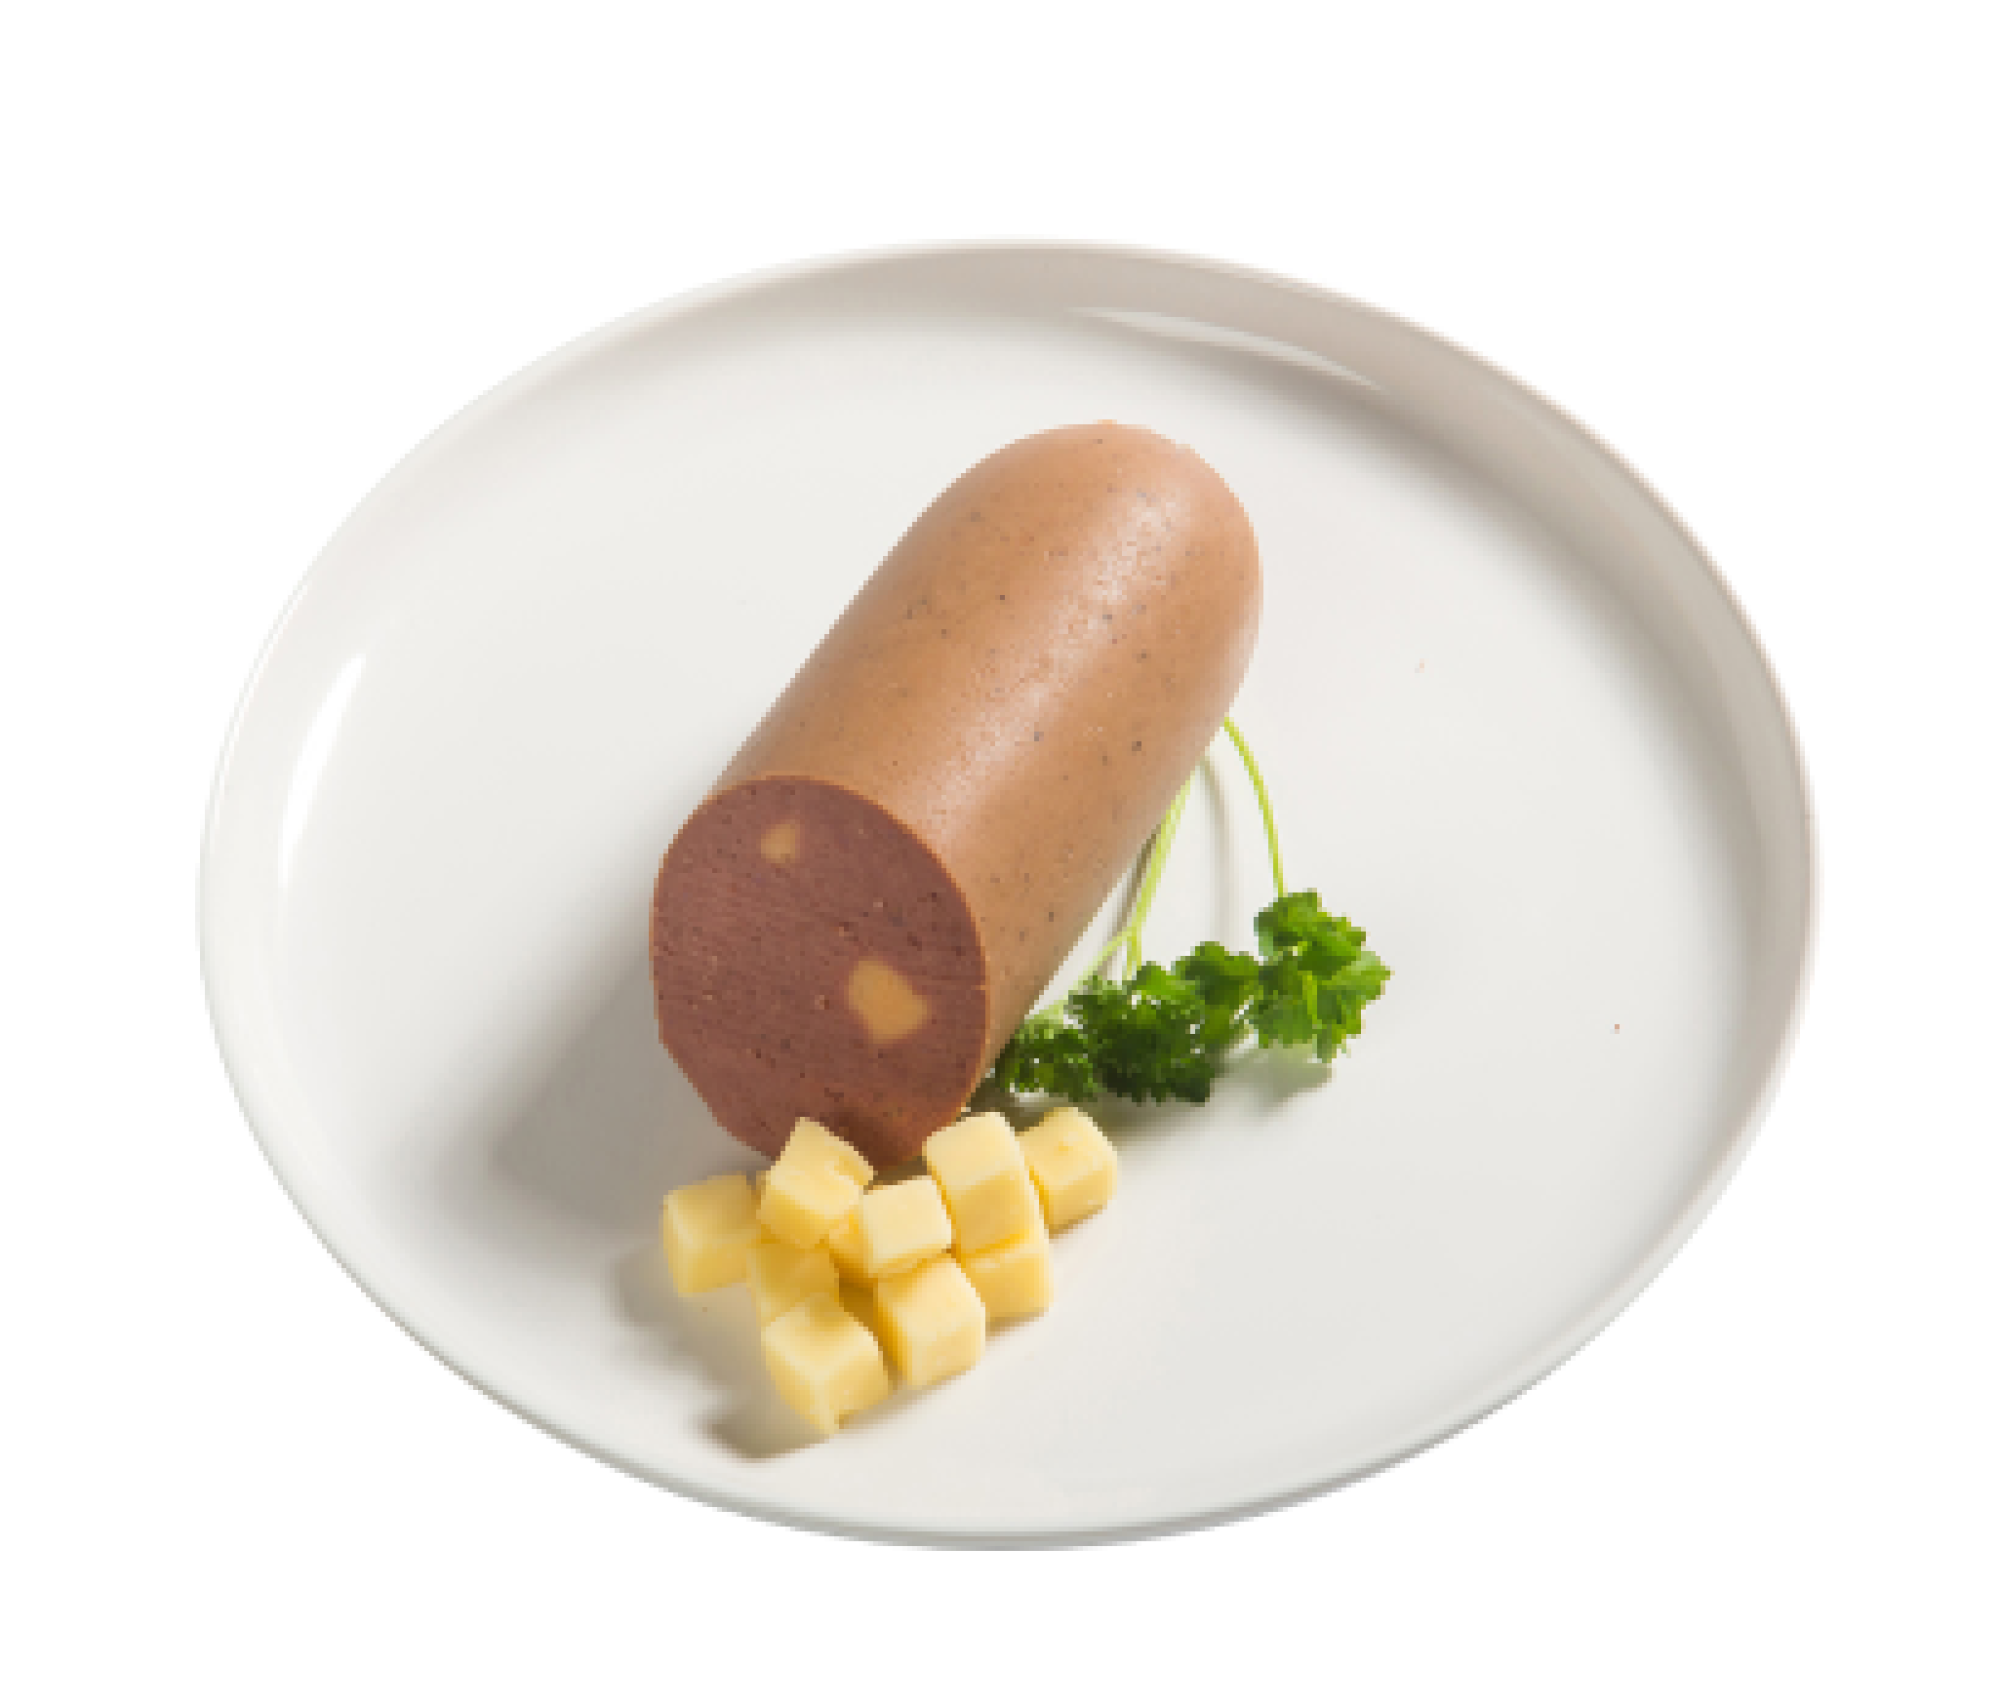 Sausage with cheese